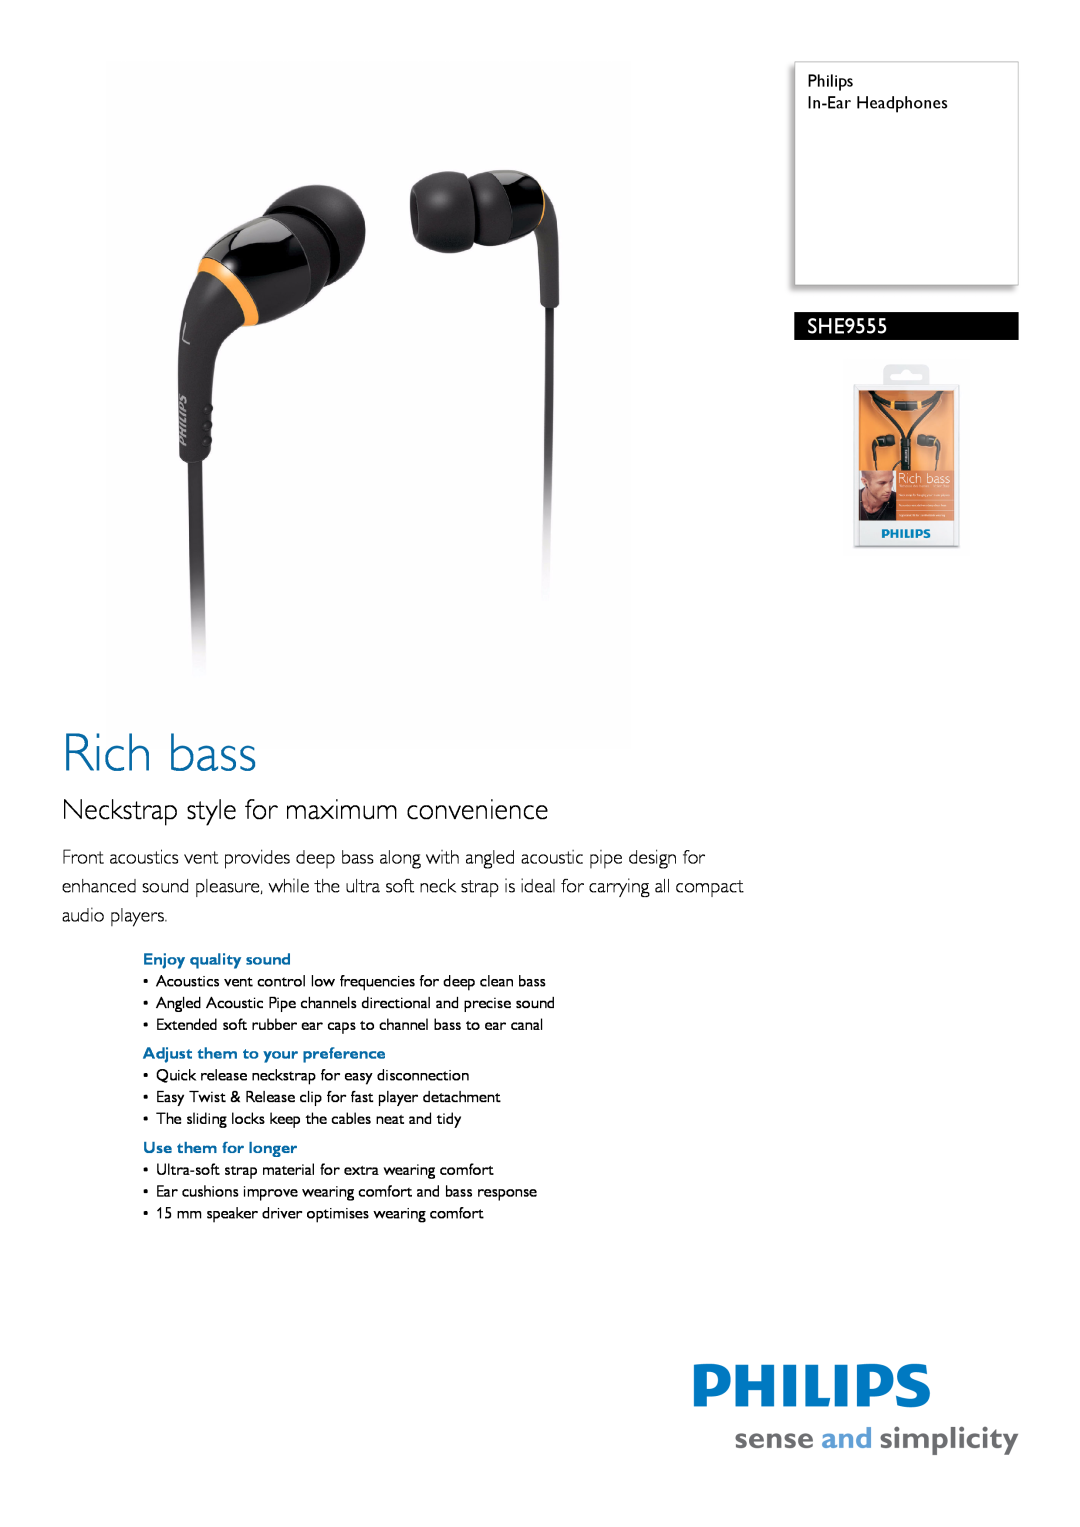 Sanyo SHE9555 manual Philips In-EarHeadphones, Enjoy quality sound, Adjust them to your preference, Use them for longer 